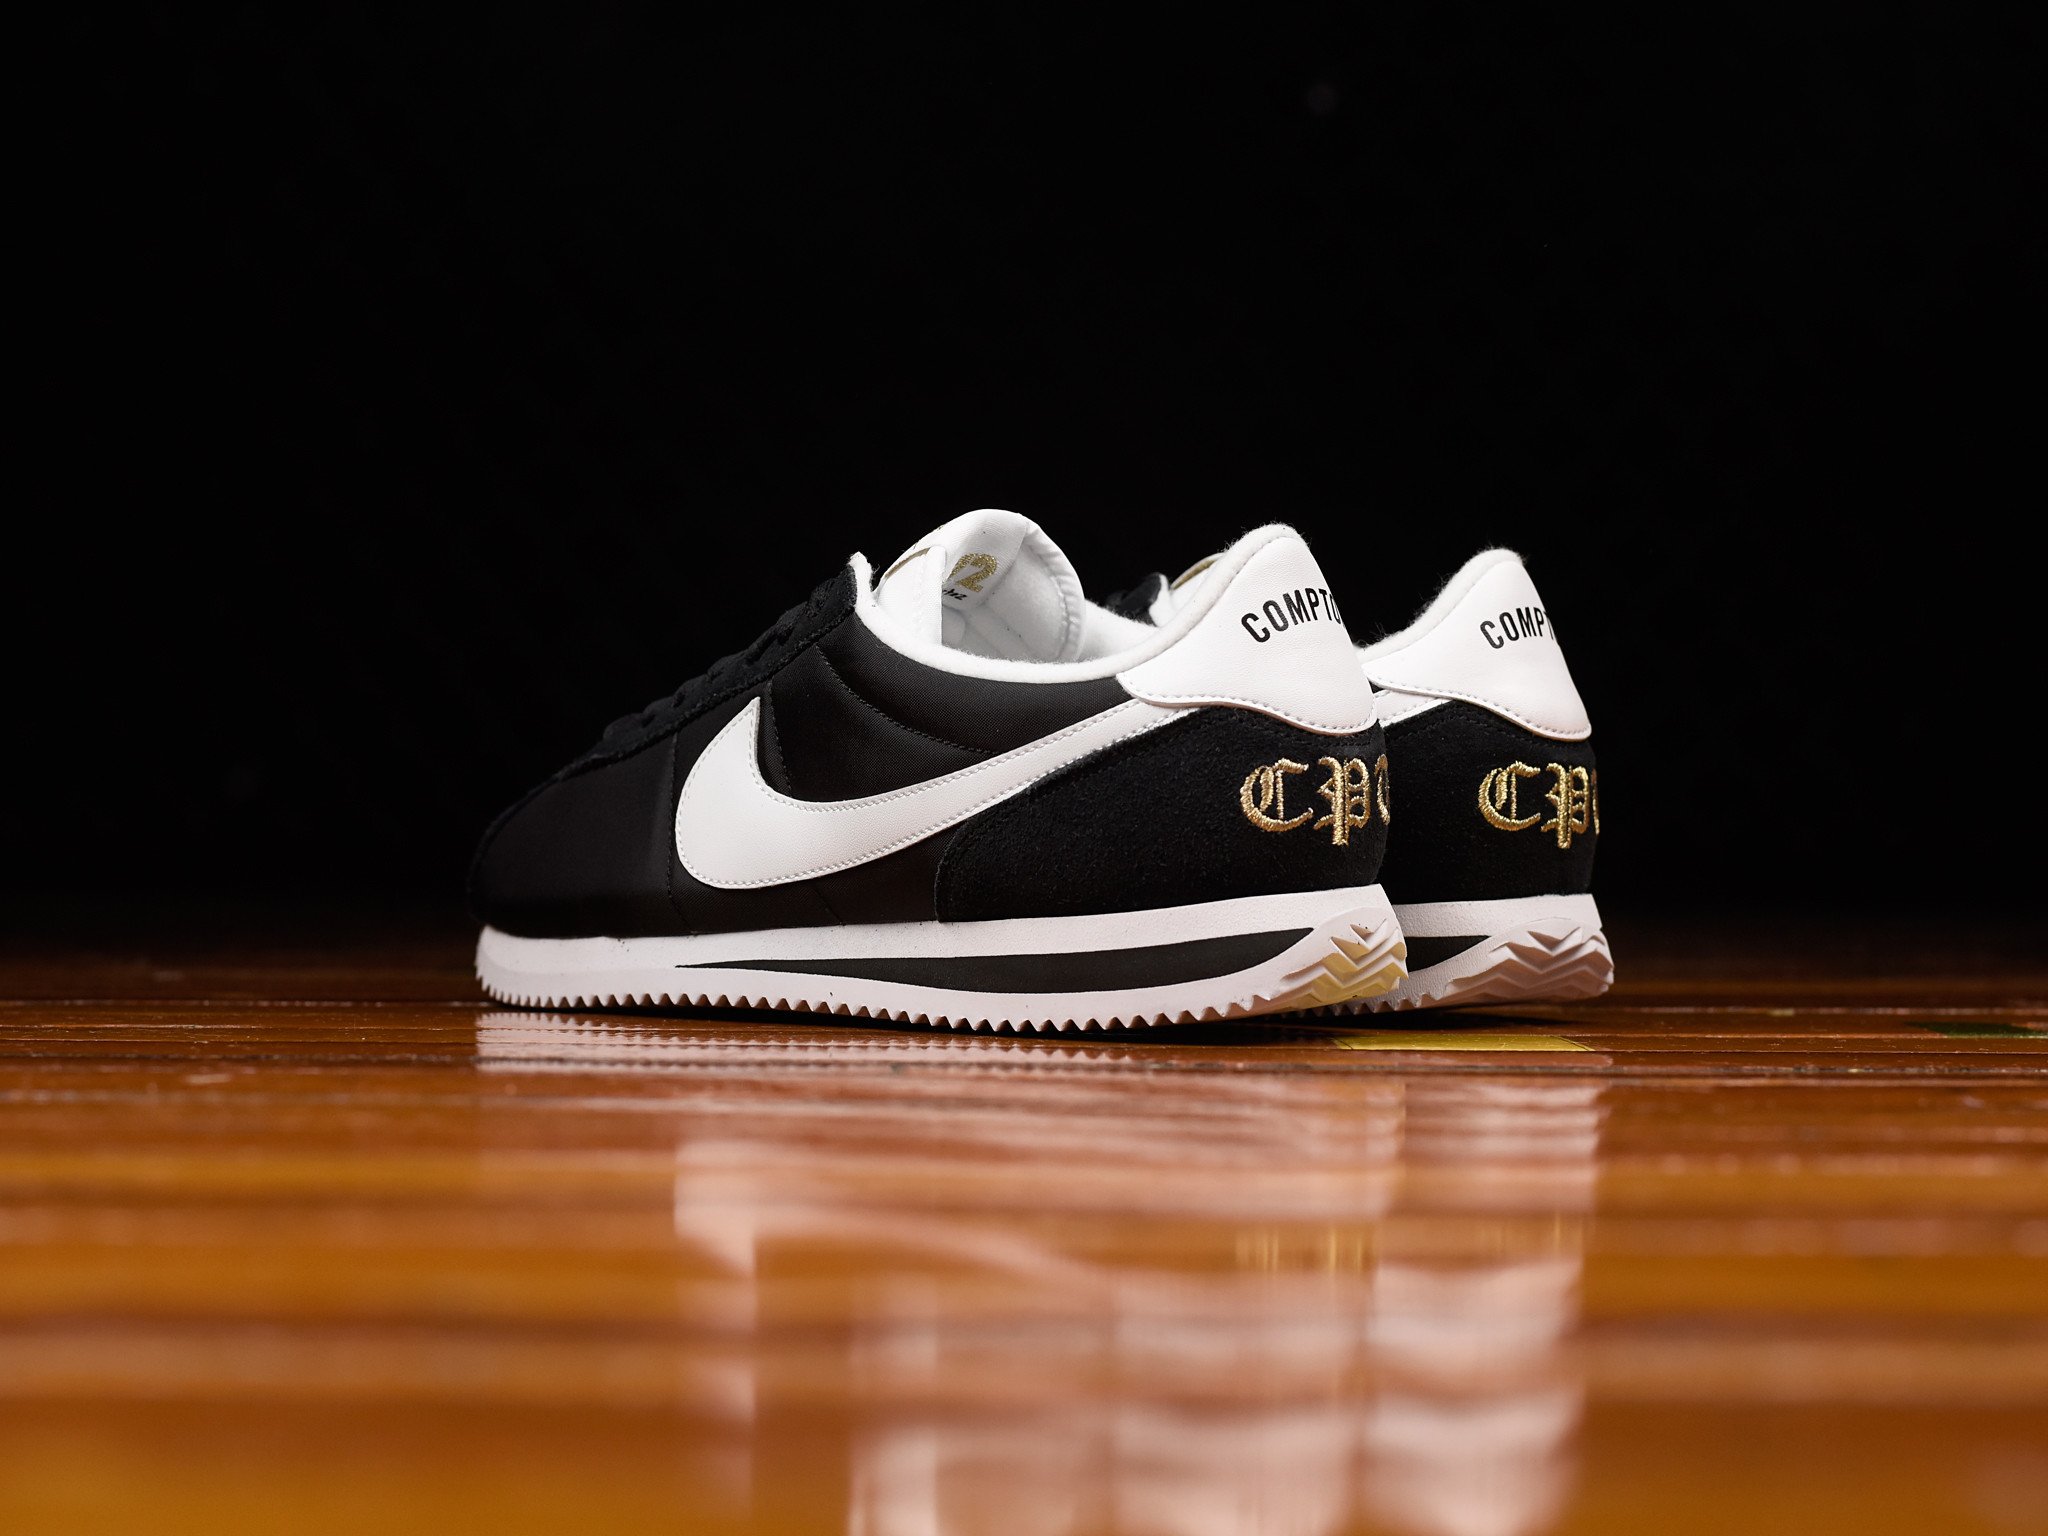 Check Out The Special Packaging For The Nike Cortez Long Beach And Compton • KicksOnFire.com